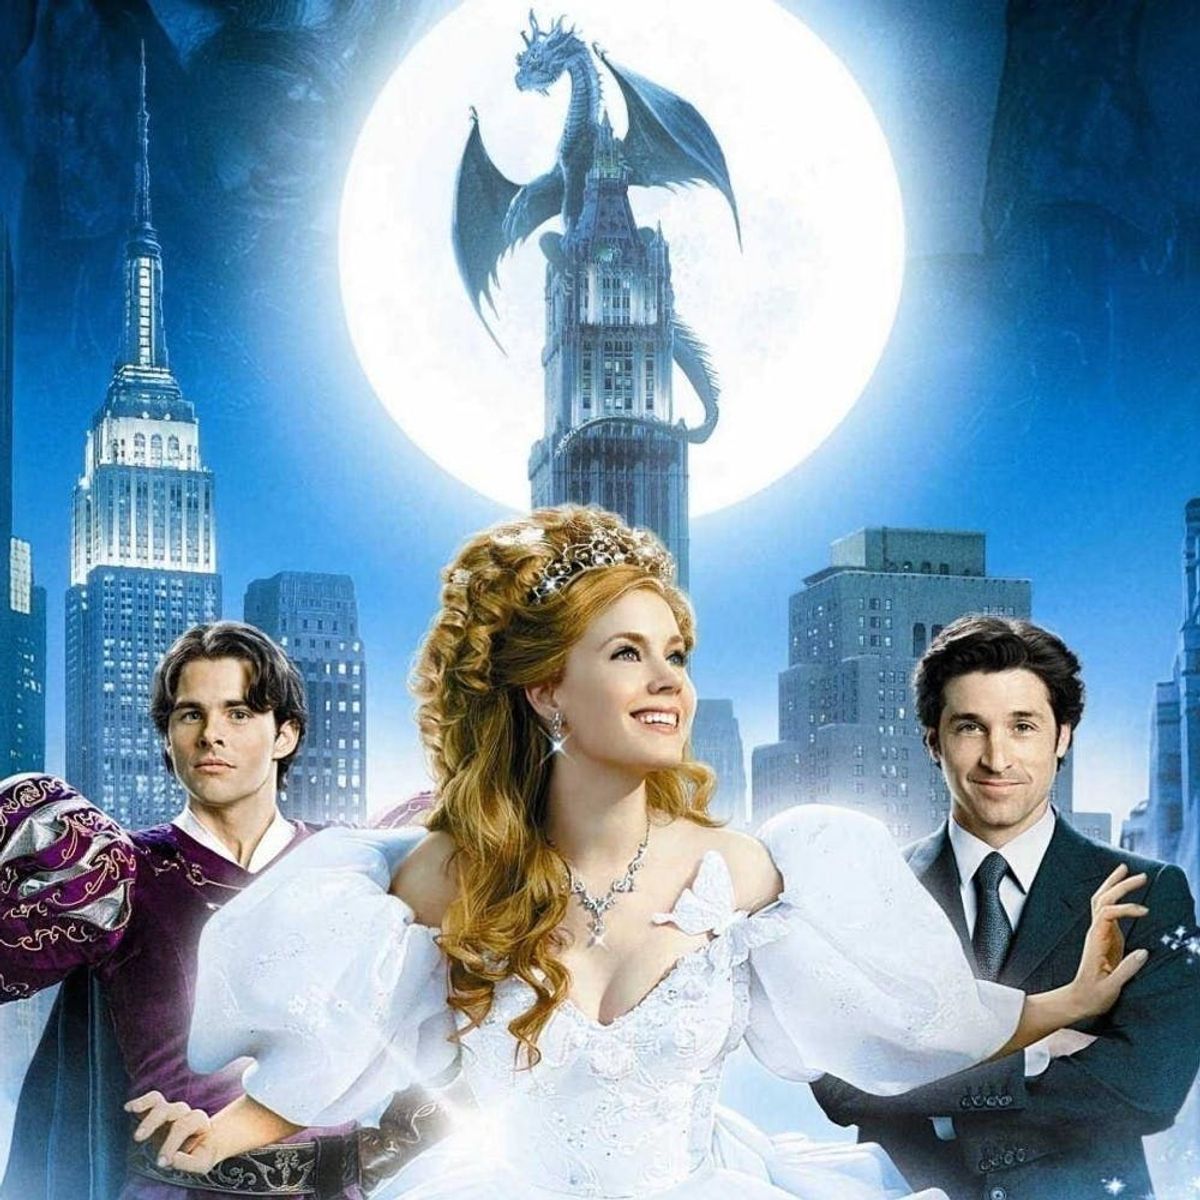 Enchanted 2 Is Finally Happening and We Have the Exciting Deets